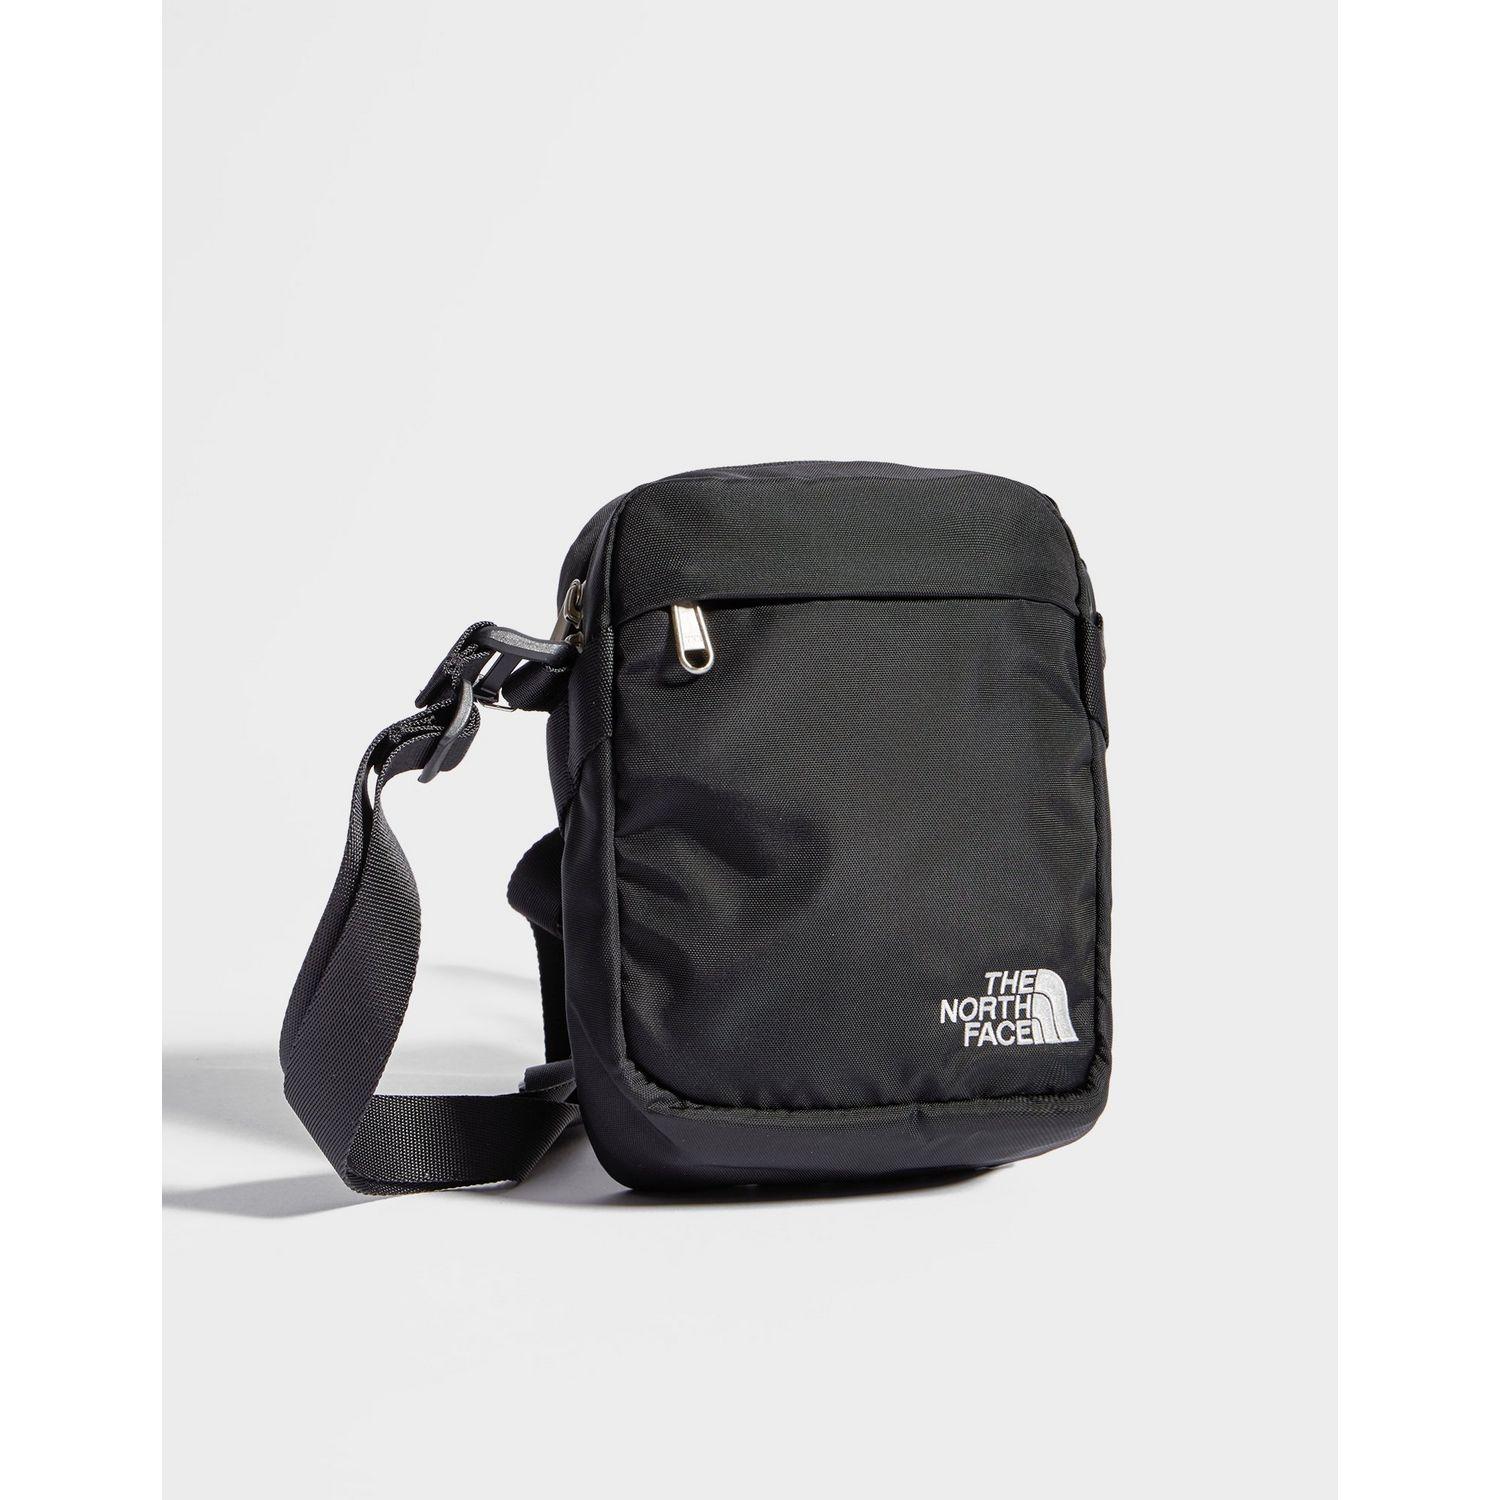 The North Face Bag / Travel Little Bag: THE NORTH FACE BASE CAMP FUSE ...